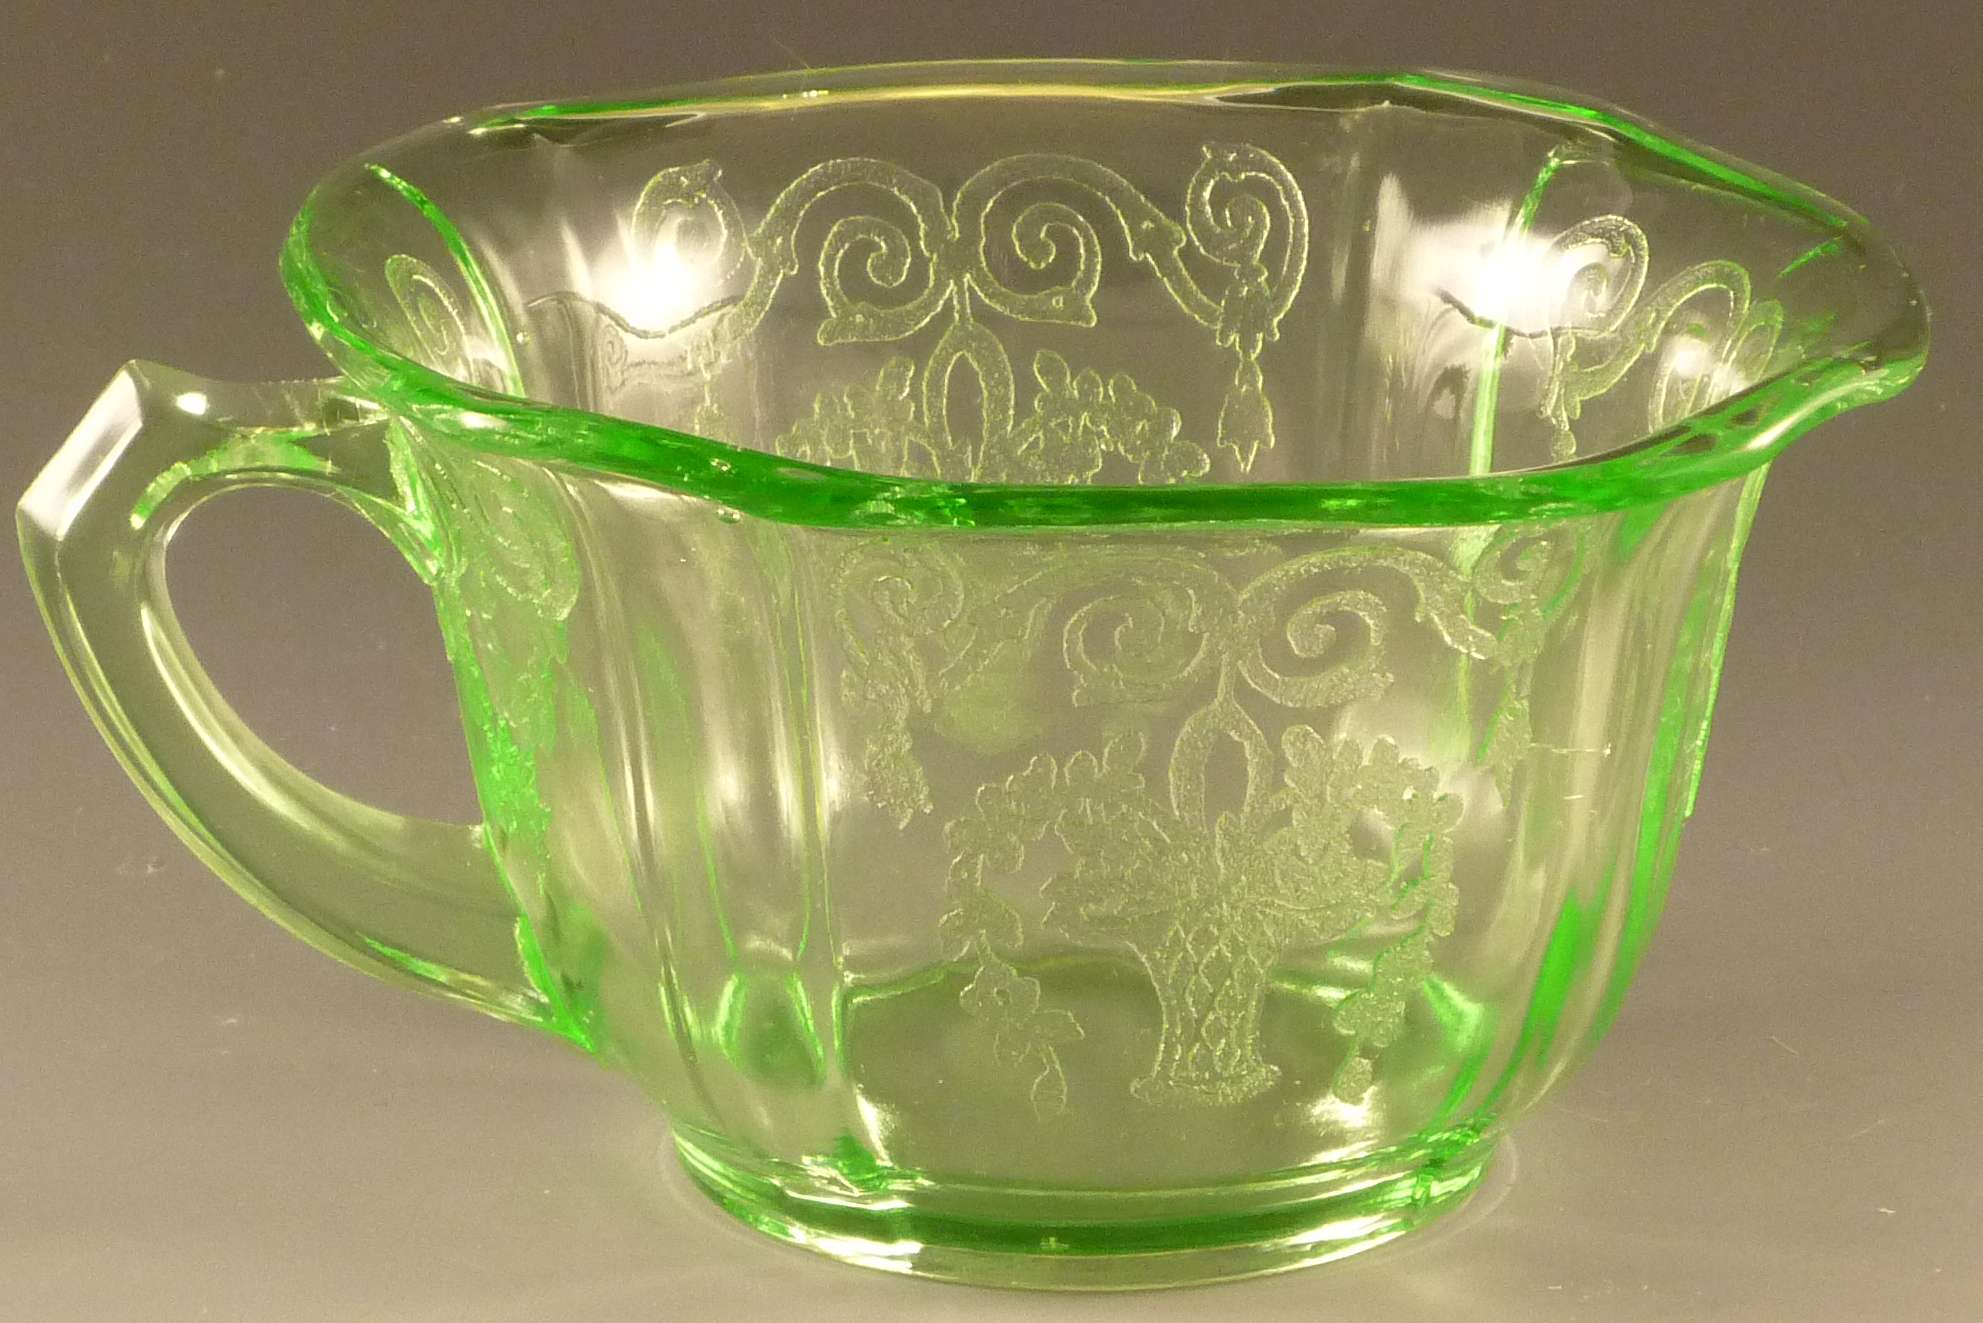 Glass Pick of the Week - Lorain Basket Green Depression Glass Cup.